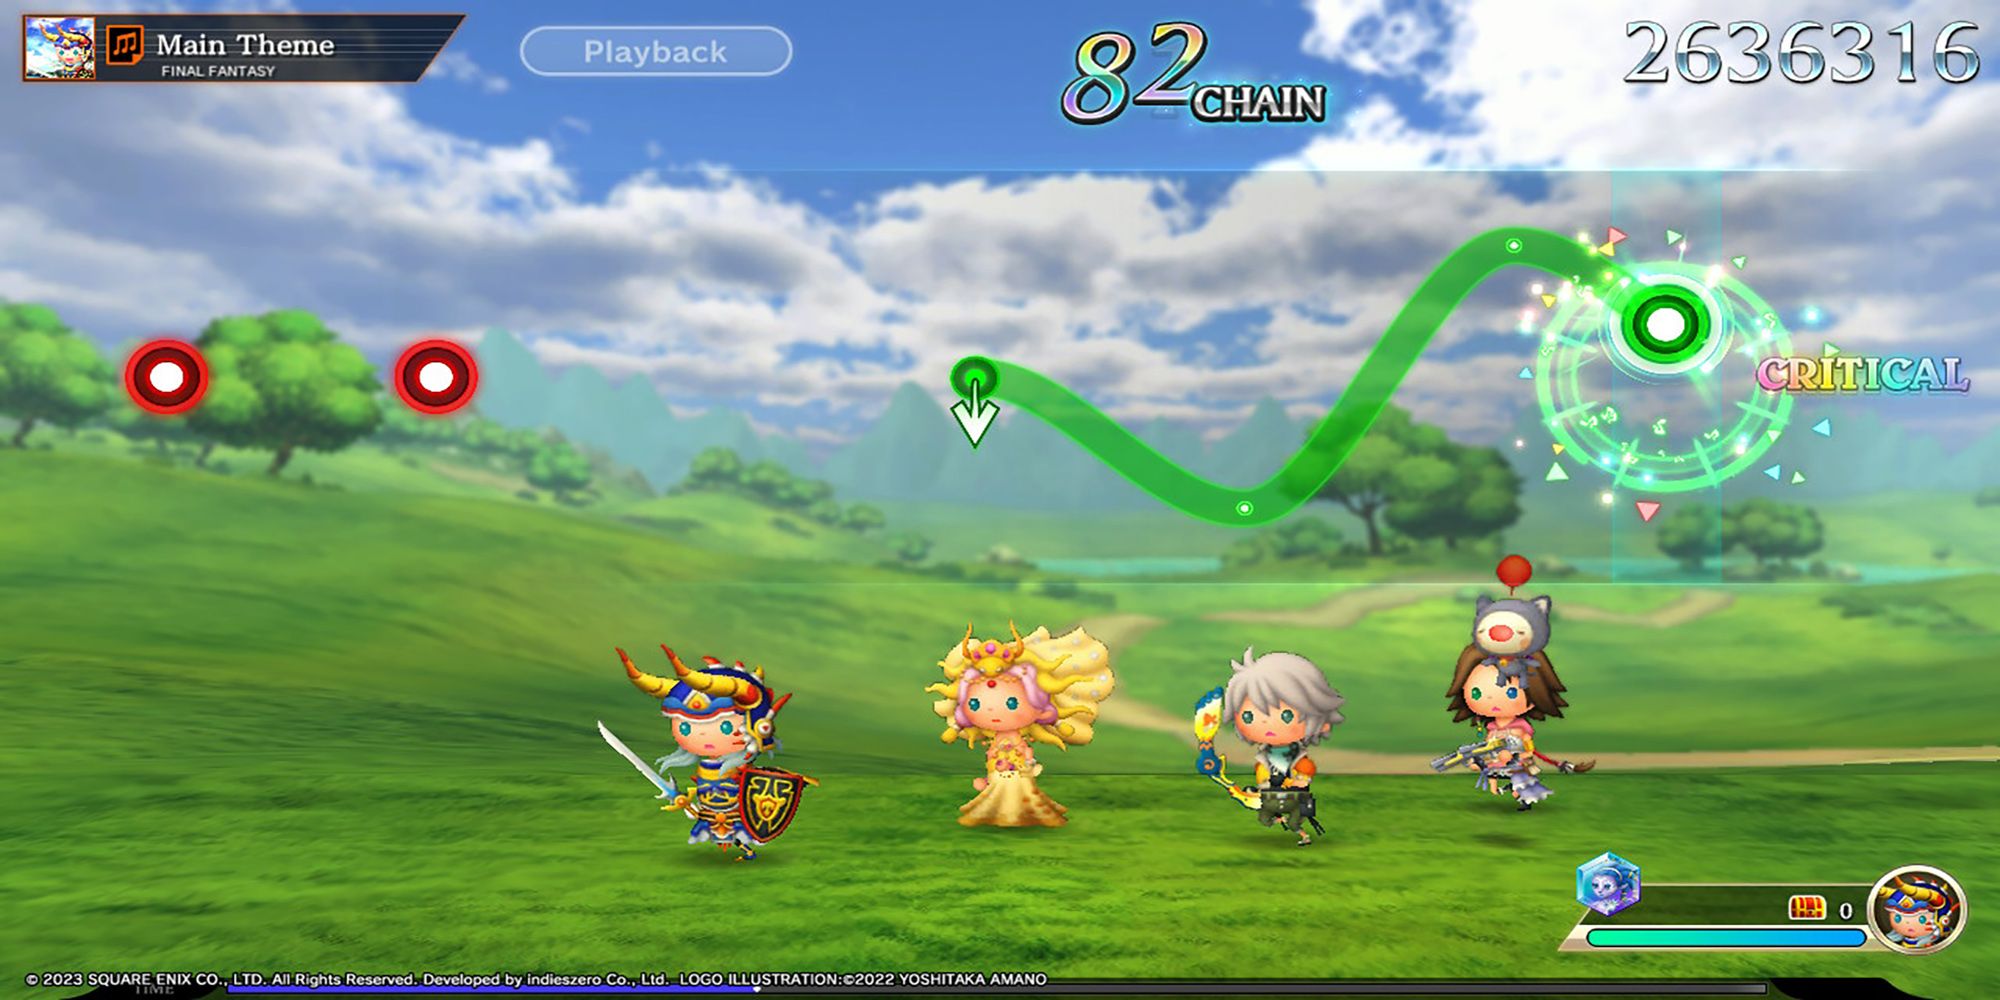 Warrior of Light, Princess Sarah, Hope, and Yuna travel through a field to the Main Theme of Final Fantasy in Theatrhythm: Final Bar Line.